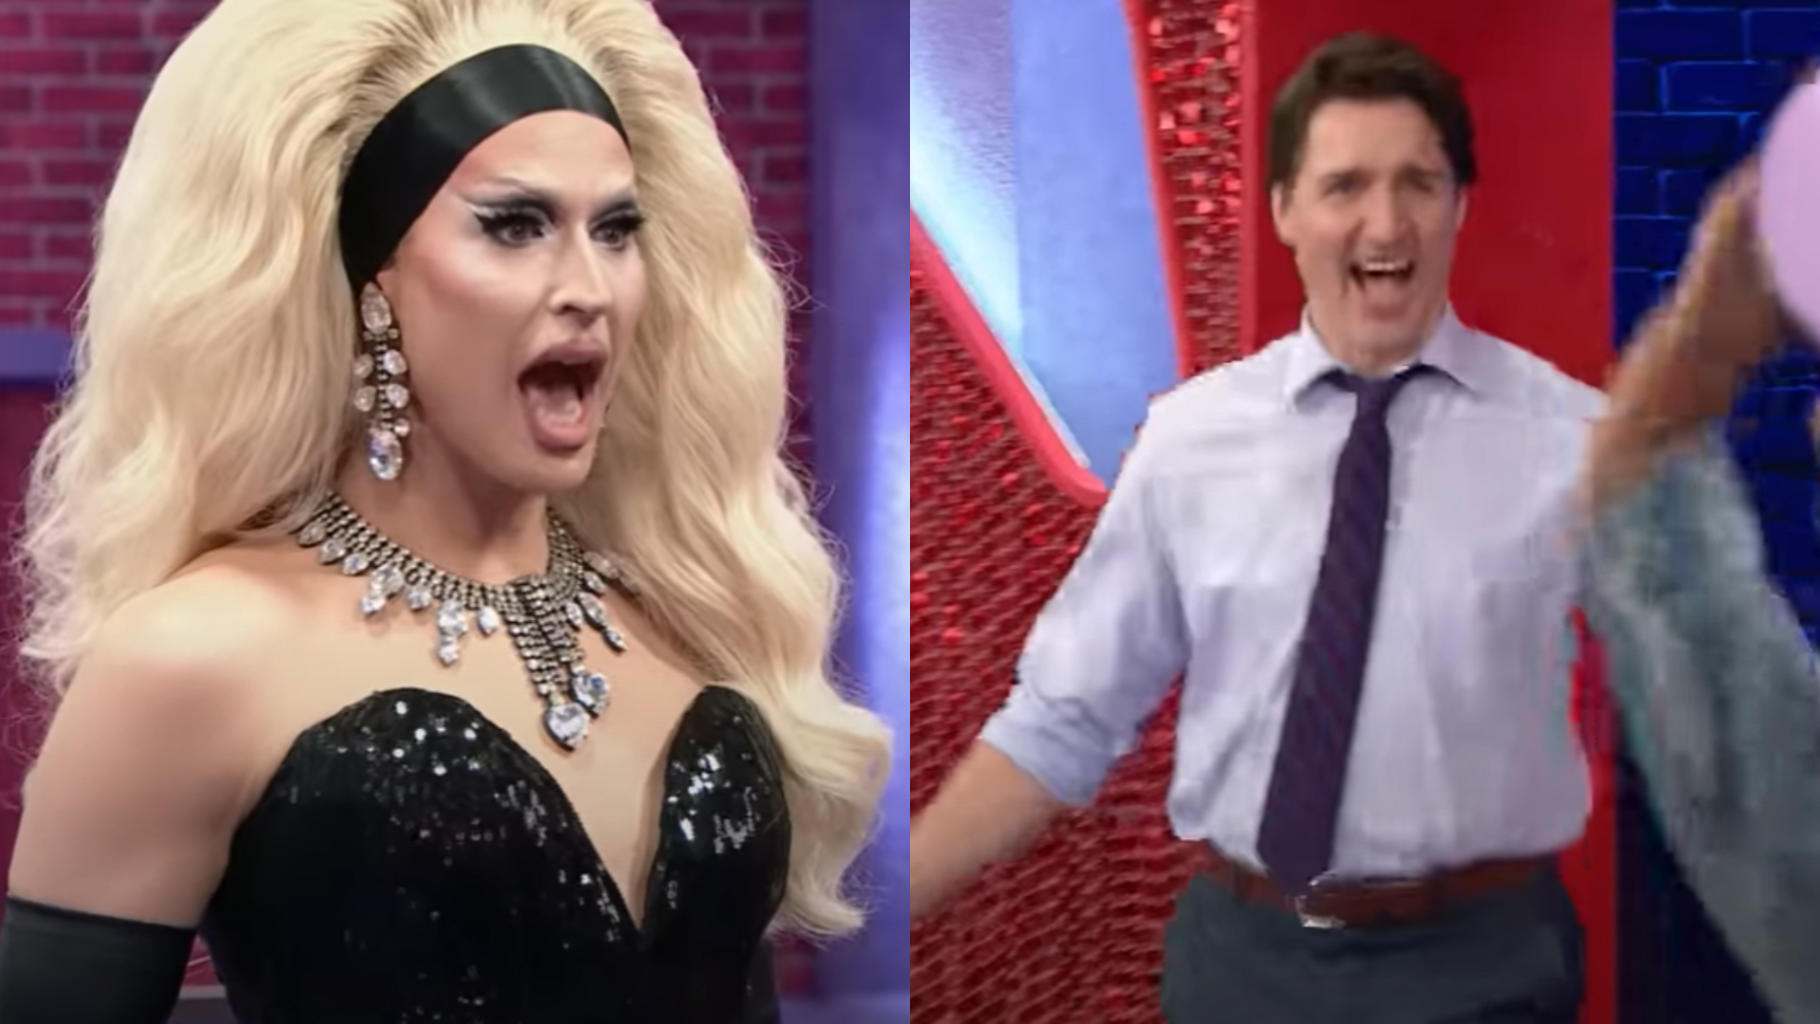 Trudeau tells drag queens that Canada needs to move from "tolerance" to "embracing" LGBT movement